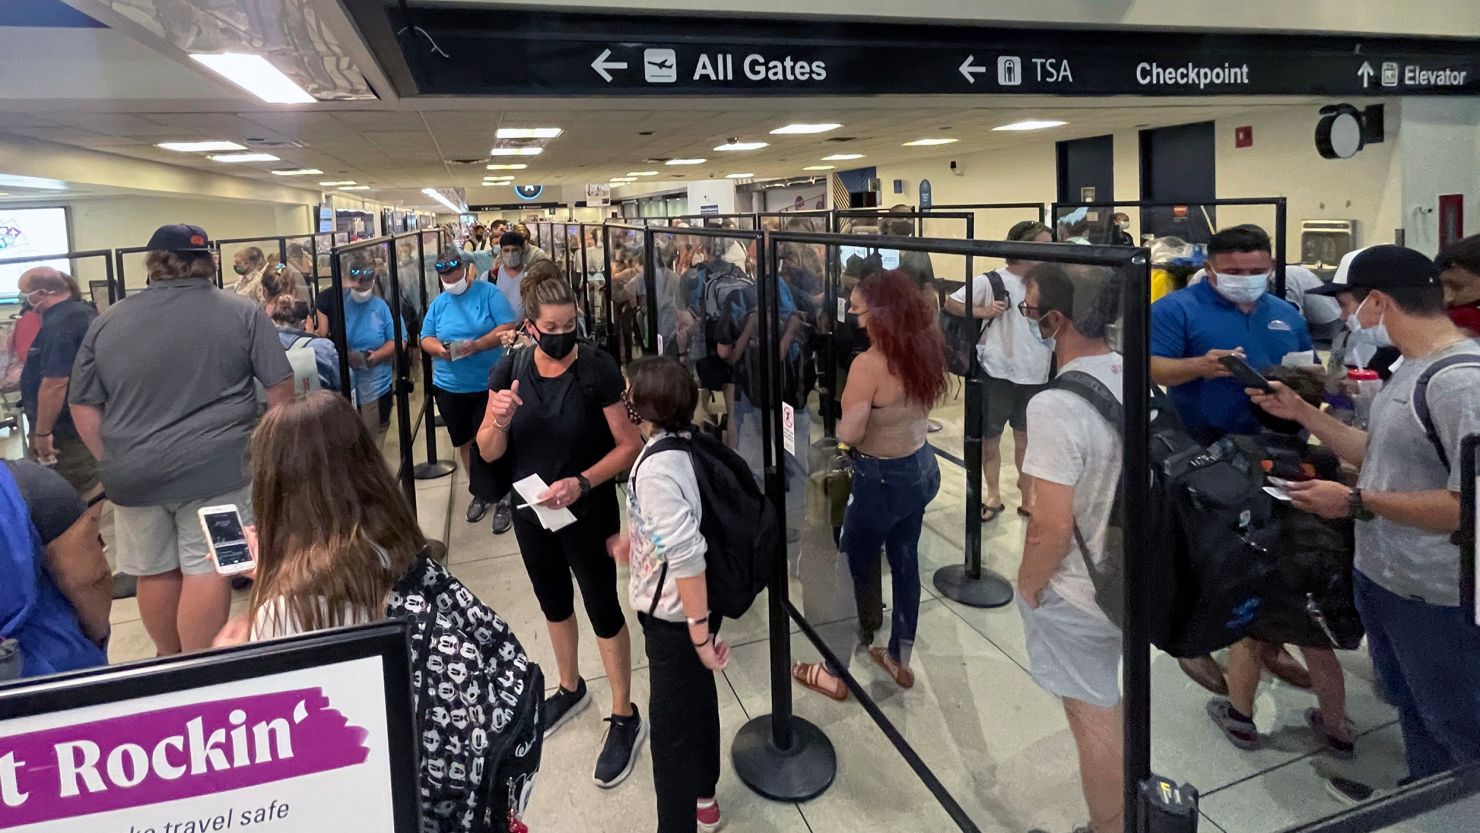 CHARLOTTE, NC - JUNE 20: American Airlines customers seen stranded at Charlotte Airport after American Airlines cut 1 percent of its flights to alleviate pressure on operations due to labor shortage and increased travel on June 20, 2021 in Charlotte, North Carolina. Credit: mpi34/MediaPunch /IPX